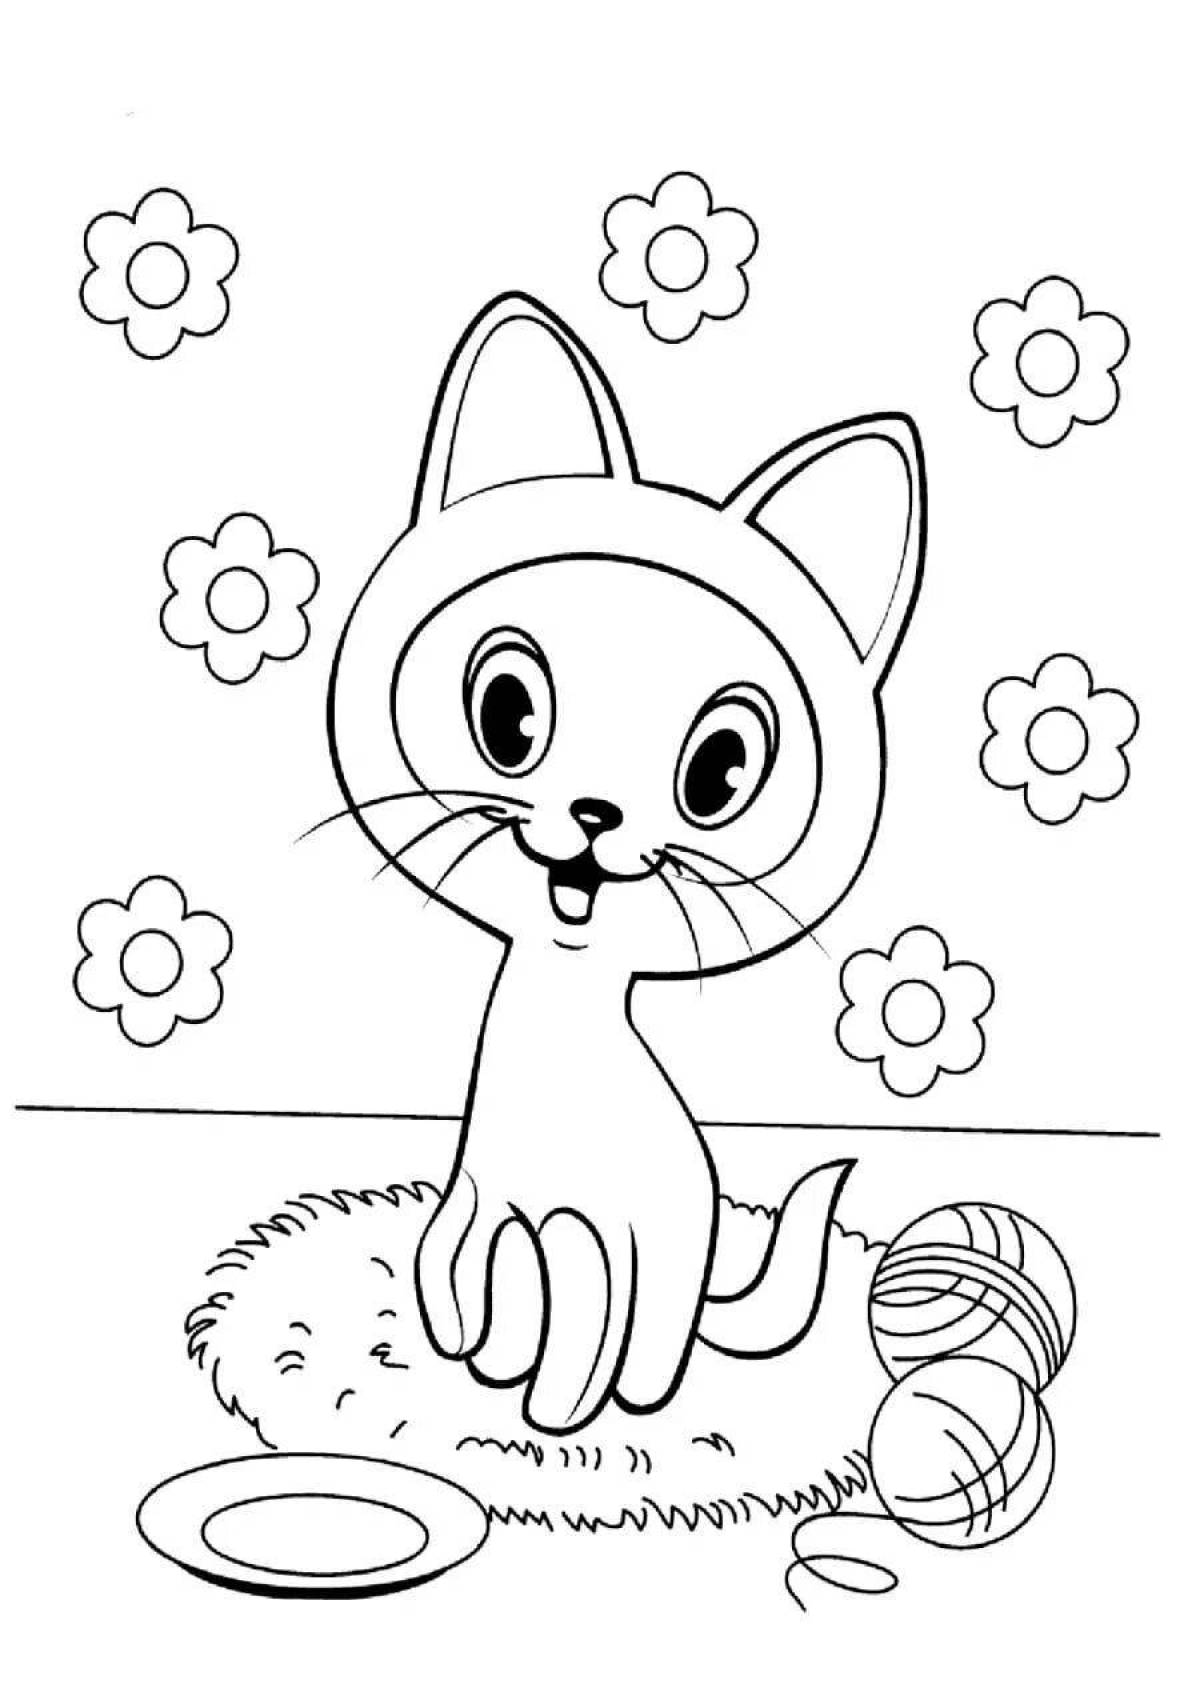 Fluffy kitten coloring book for 2-3 year olds